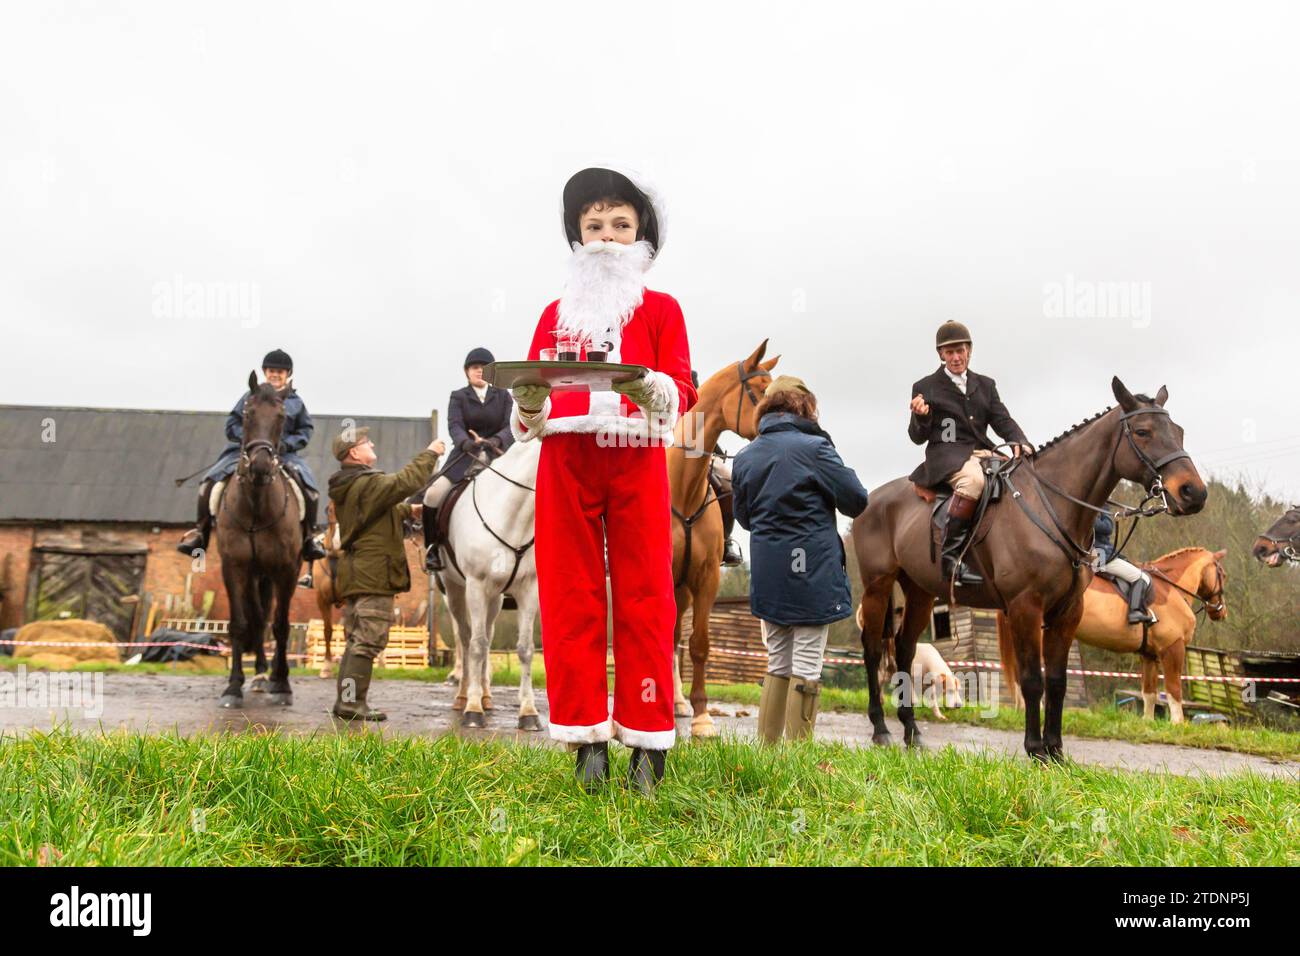 Upper Arley, Kidderminster, Worcestershire, UK. 19th Dec, 2023. 10-year-old Henley Mills dressed as Santa Claus hands out the traditional glass of port to members of the Albrighton and Woodland hunt as they have a lawn meet and trail ride from a farm in Upper Arley, near Kidderminster in Worcestershire. Credit: Peter Lopeman/Alamy Live News Stock Photo